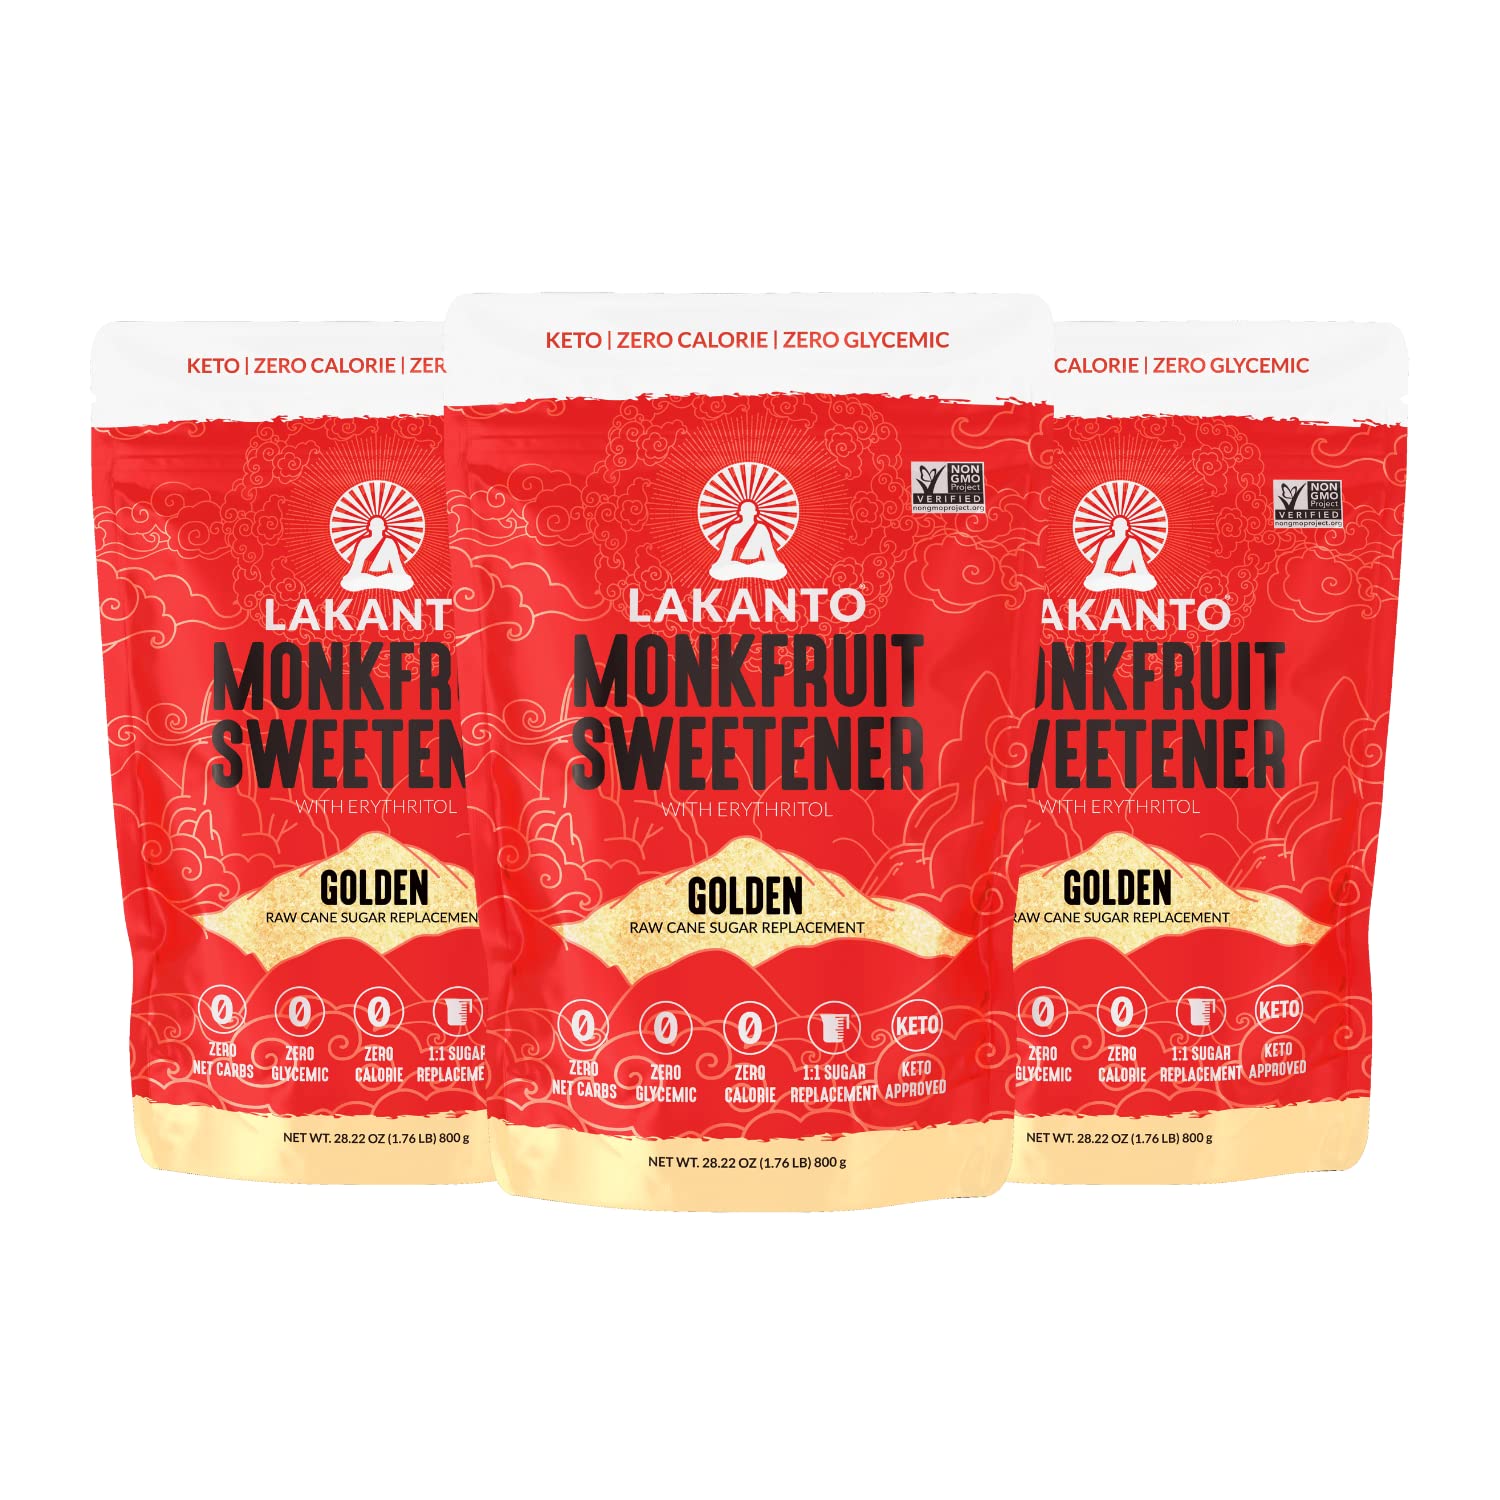 Lakanto Golden Monk Fruit Sweetener with Erythritol - Raw Cane Sugar Substitute, Zero Calorie, Keto Diet Friendly, Zero Net Carbs, Baking, Extract, Sugar Replacement (Golden - 1.76 lb Pack of 3)